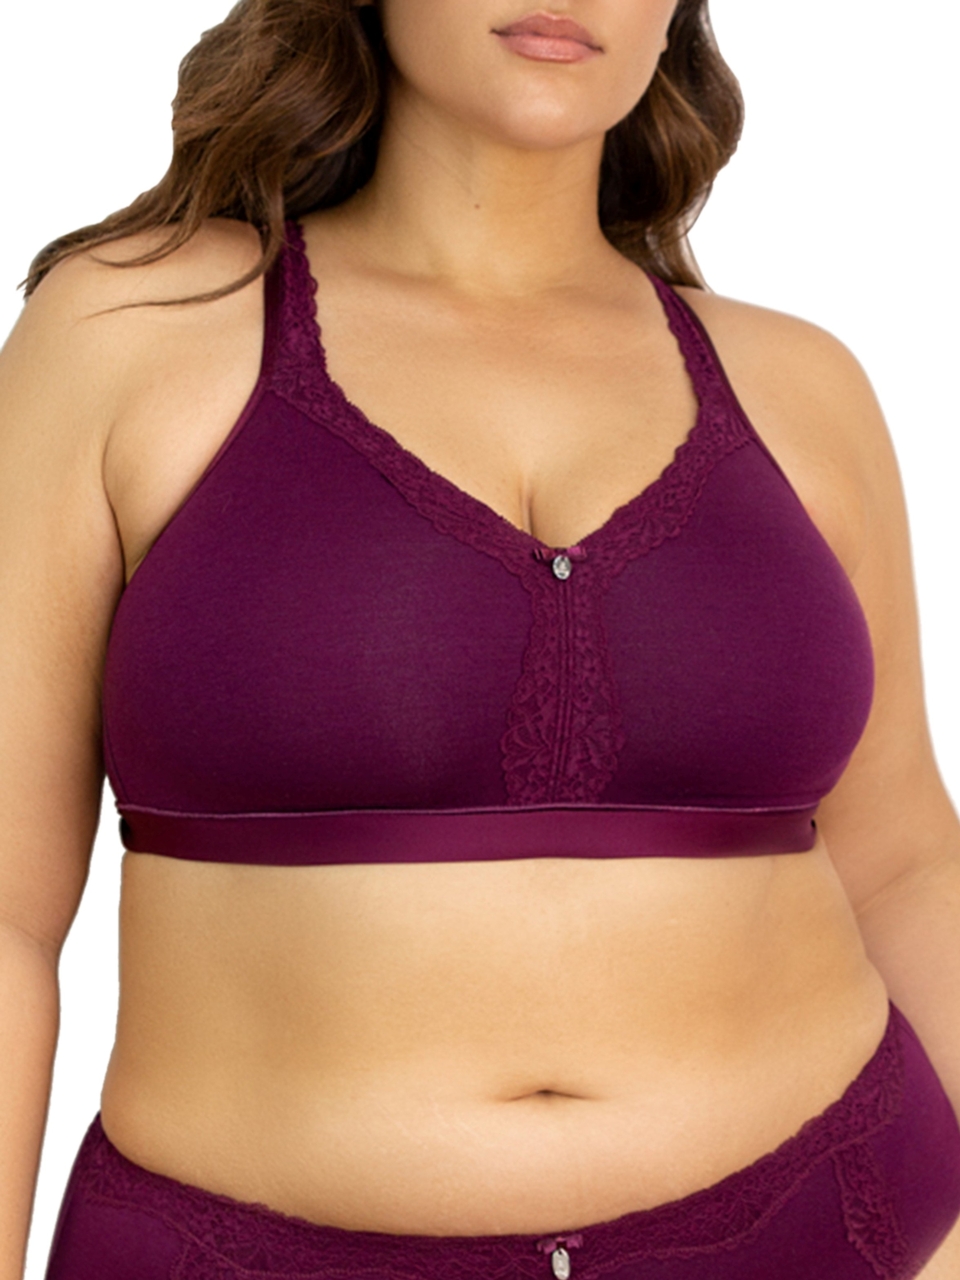 Mysa Smooth Cup Sized Bralette BEST